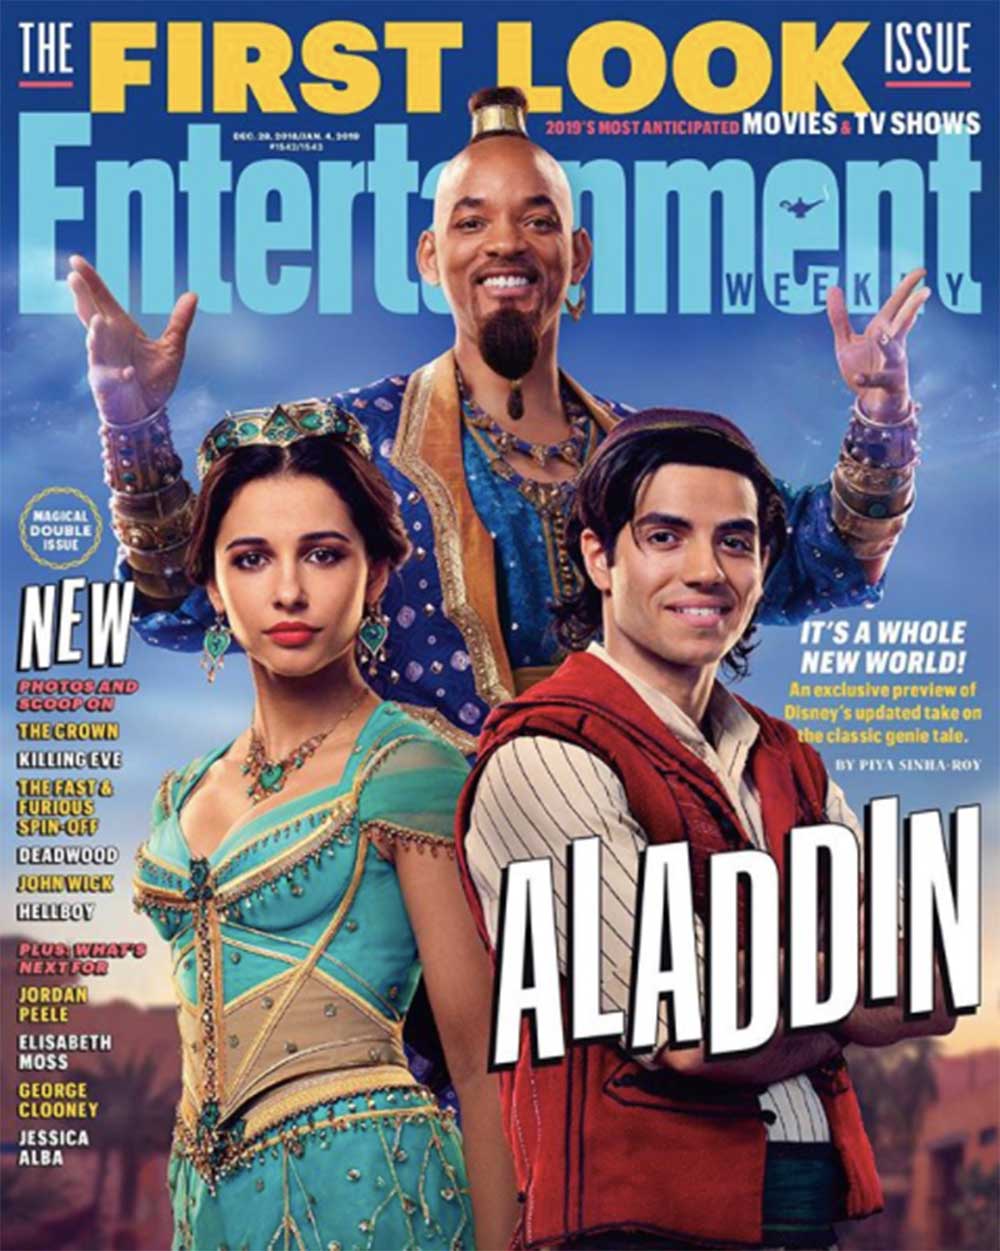 『Entertainment Weekly』の表紙を飾ったキャストたち（画像は『Will Smith　2018年12月19日付Instagram「BAM!! First look at the Genie, Princess Jasmine, and ＃Aladdin! Check Me Rockin’ the Top Knot Ponytail Vibes in ＠entertainmentweekly」』のスクリーンショット）』のスクリーンショット）